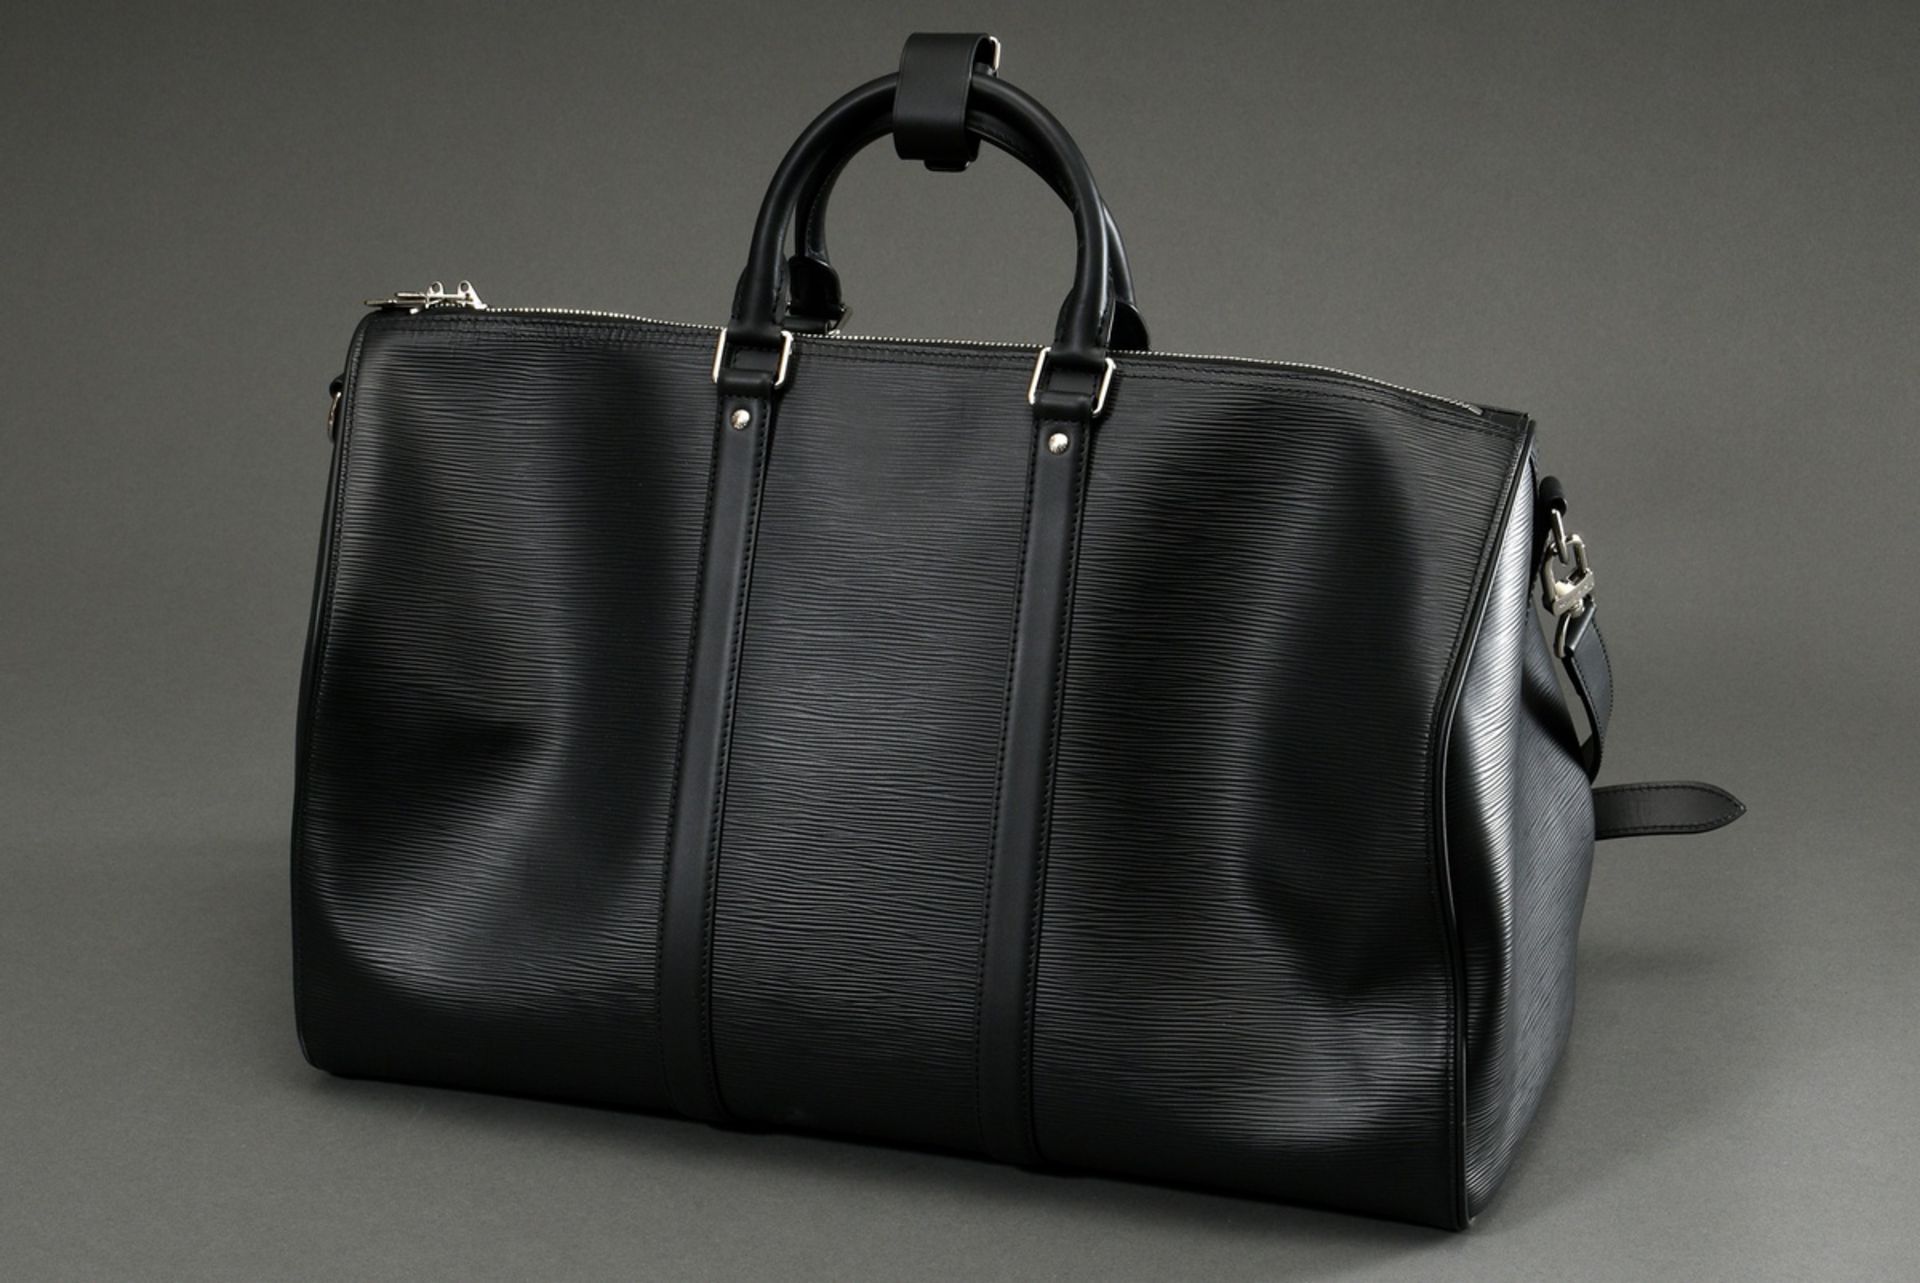 Louis Vuitton "Keepall 50" in Epi black, Damier graphite and raised Brand lettering on blue and whi - Image 4 of 9